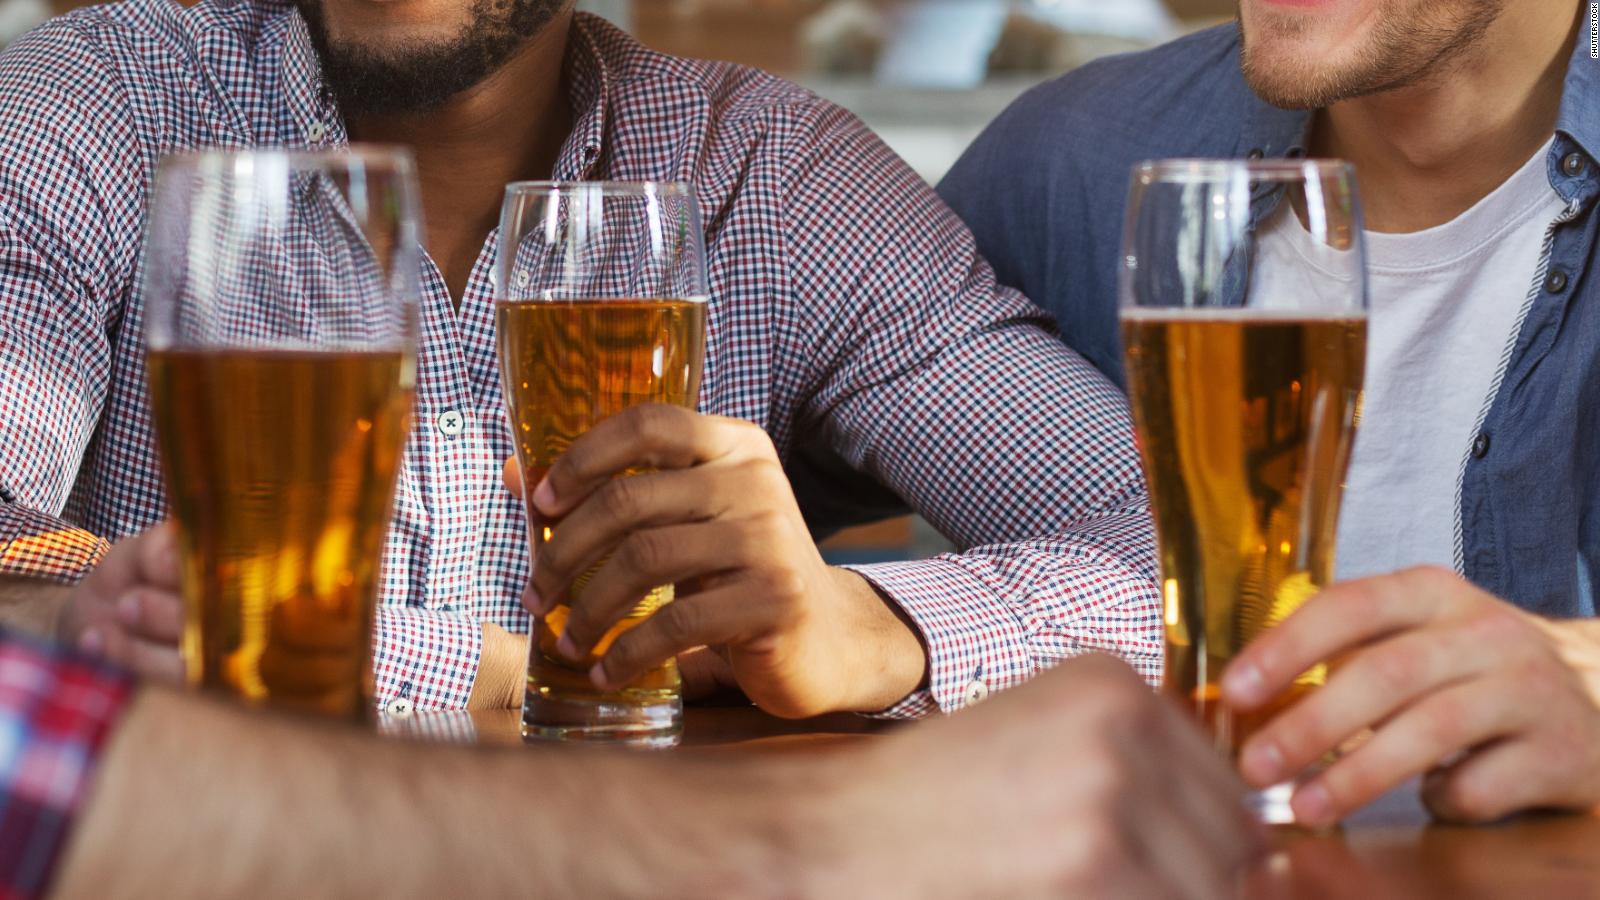 Americans over 30 have been drinking more during the coronavirus